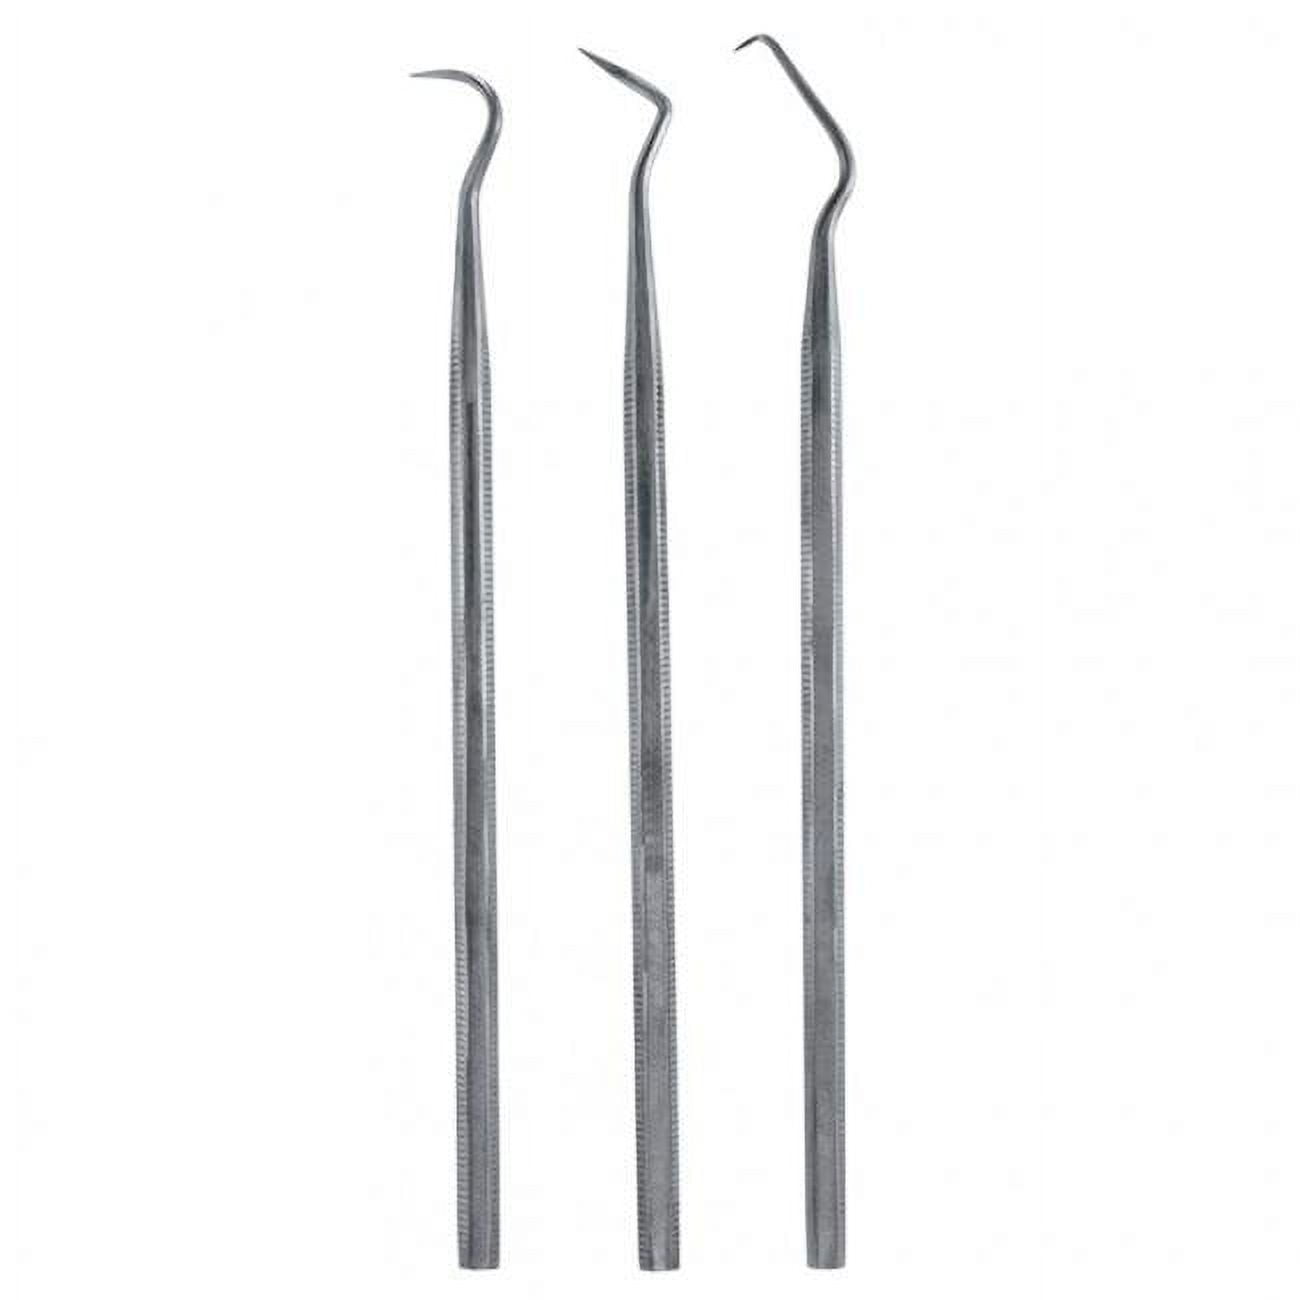 Picture of Acrylicos Vallejo VJP02001 Probes Stainless Steel Set - Pack of 3